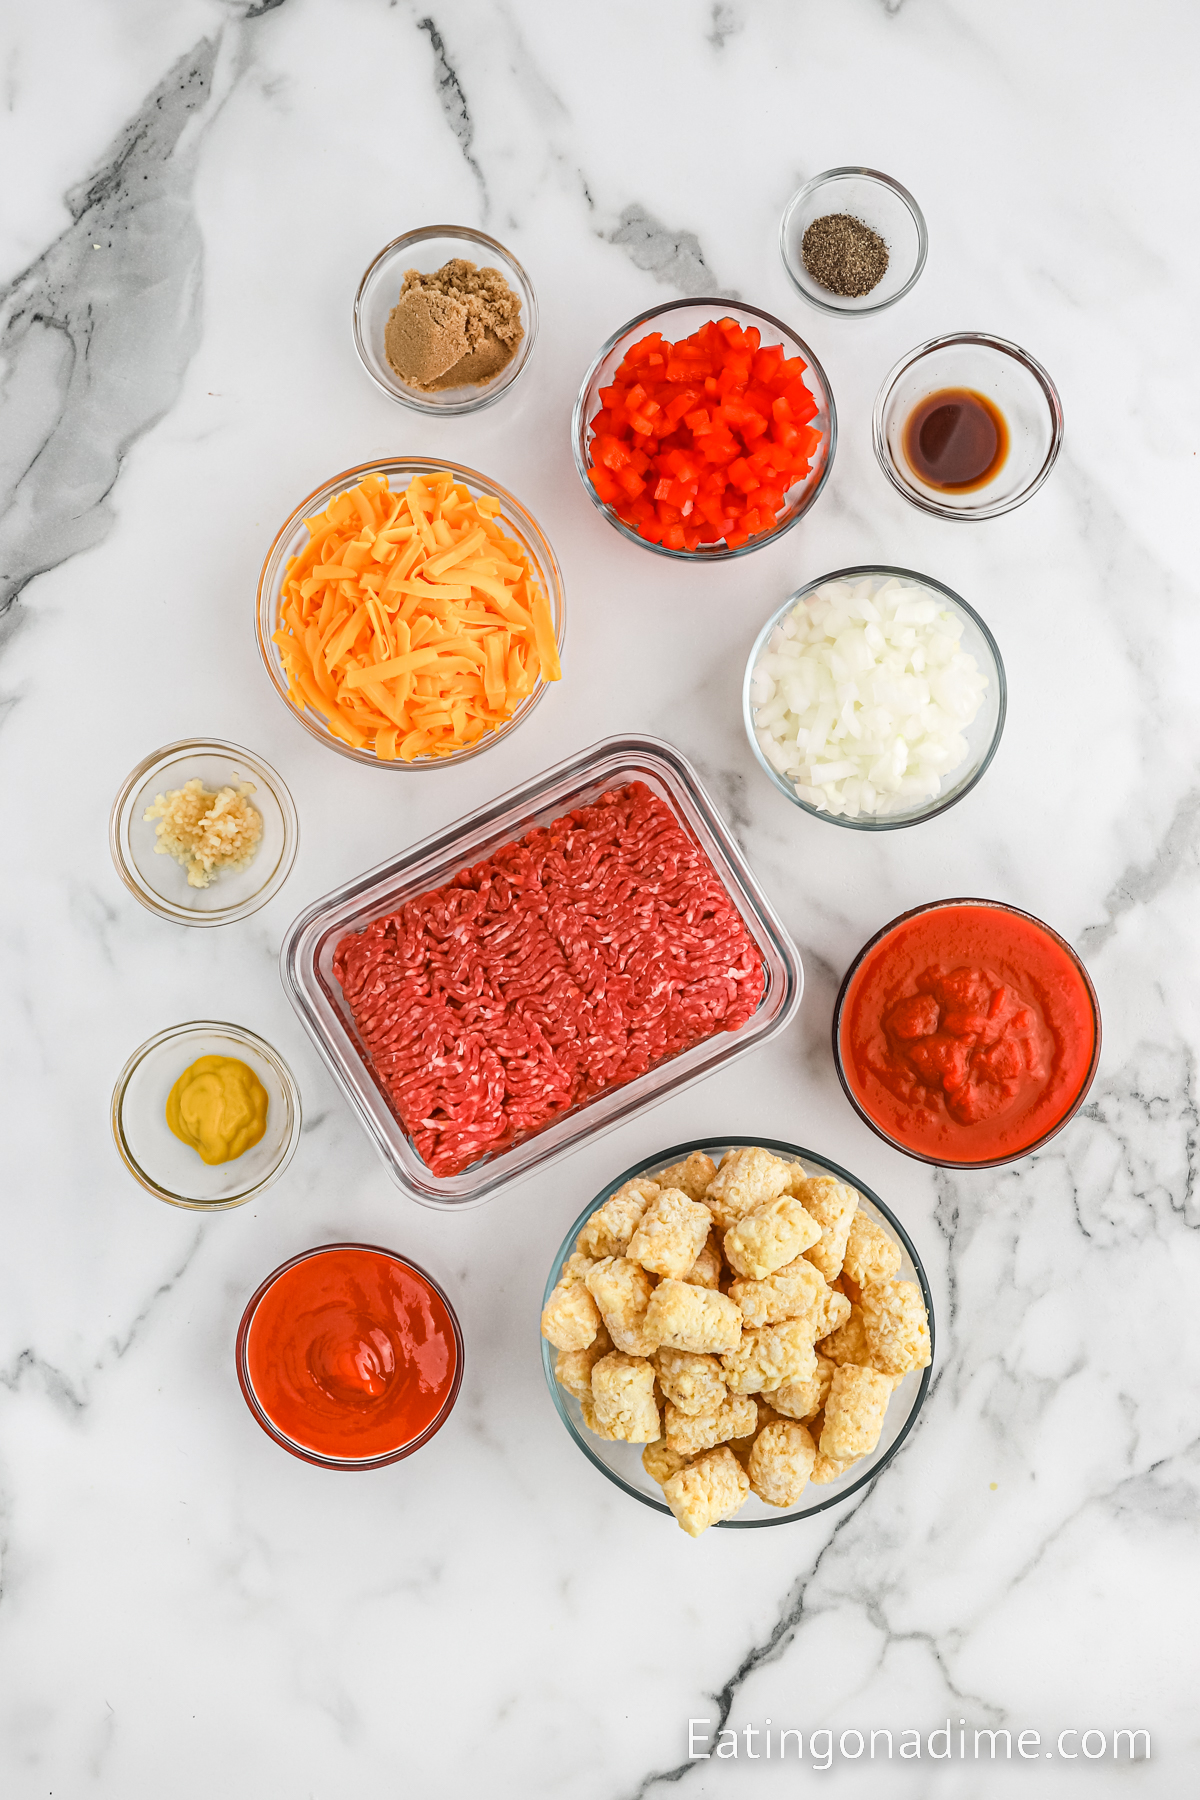 Ingredients needed - ground beef, red bell pepper, onion, minced garlic, tomato sauce, ketchup, brown sugar, mustard, worcestershire sauce, black pepper, cheese, tator tots